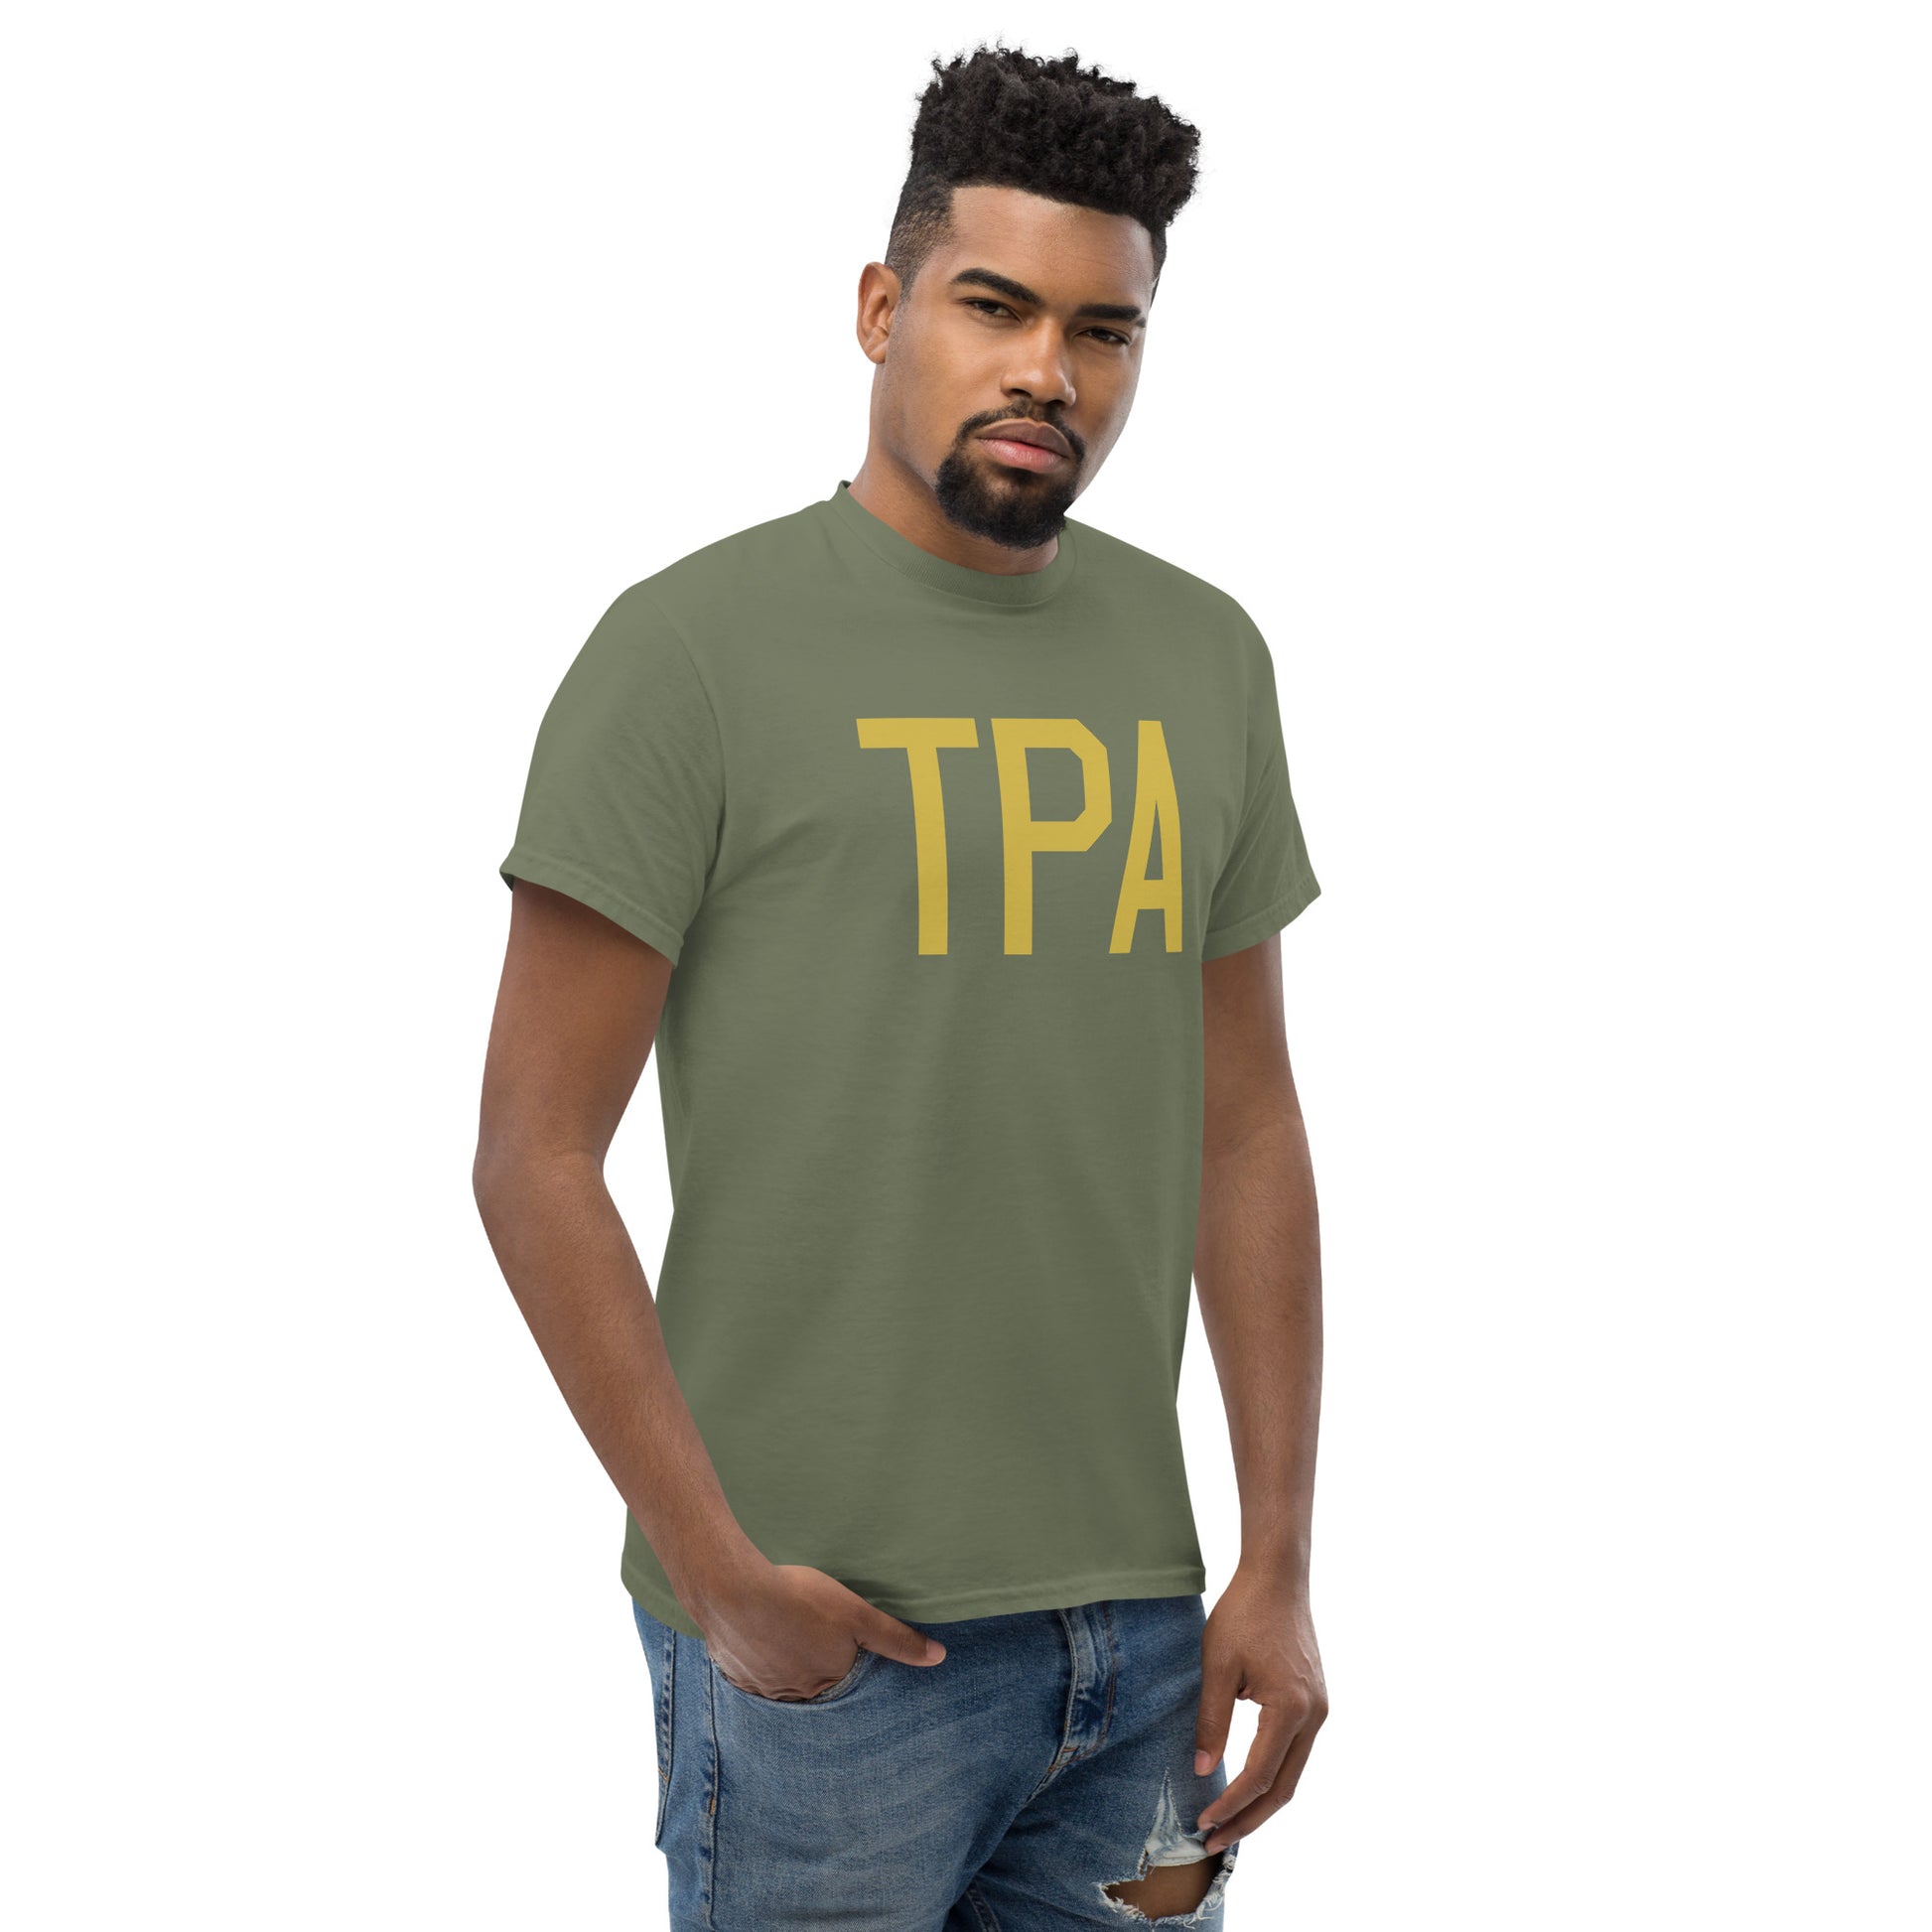 Aviation Enthusiast Men's Tee - Old Gold Graphic • TPA Tampa • YHM Designs - Image 08